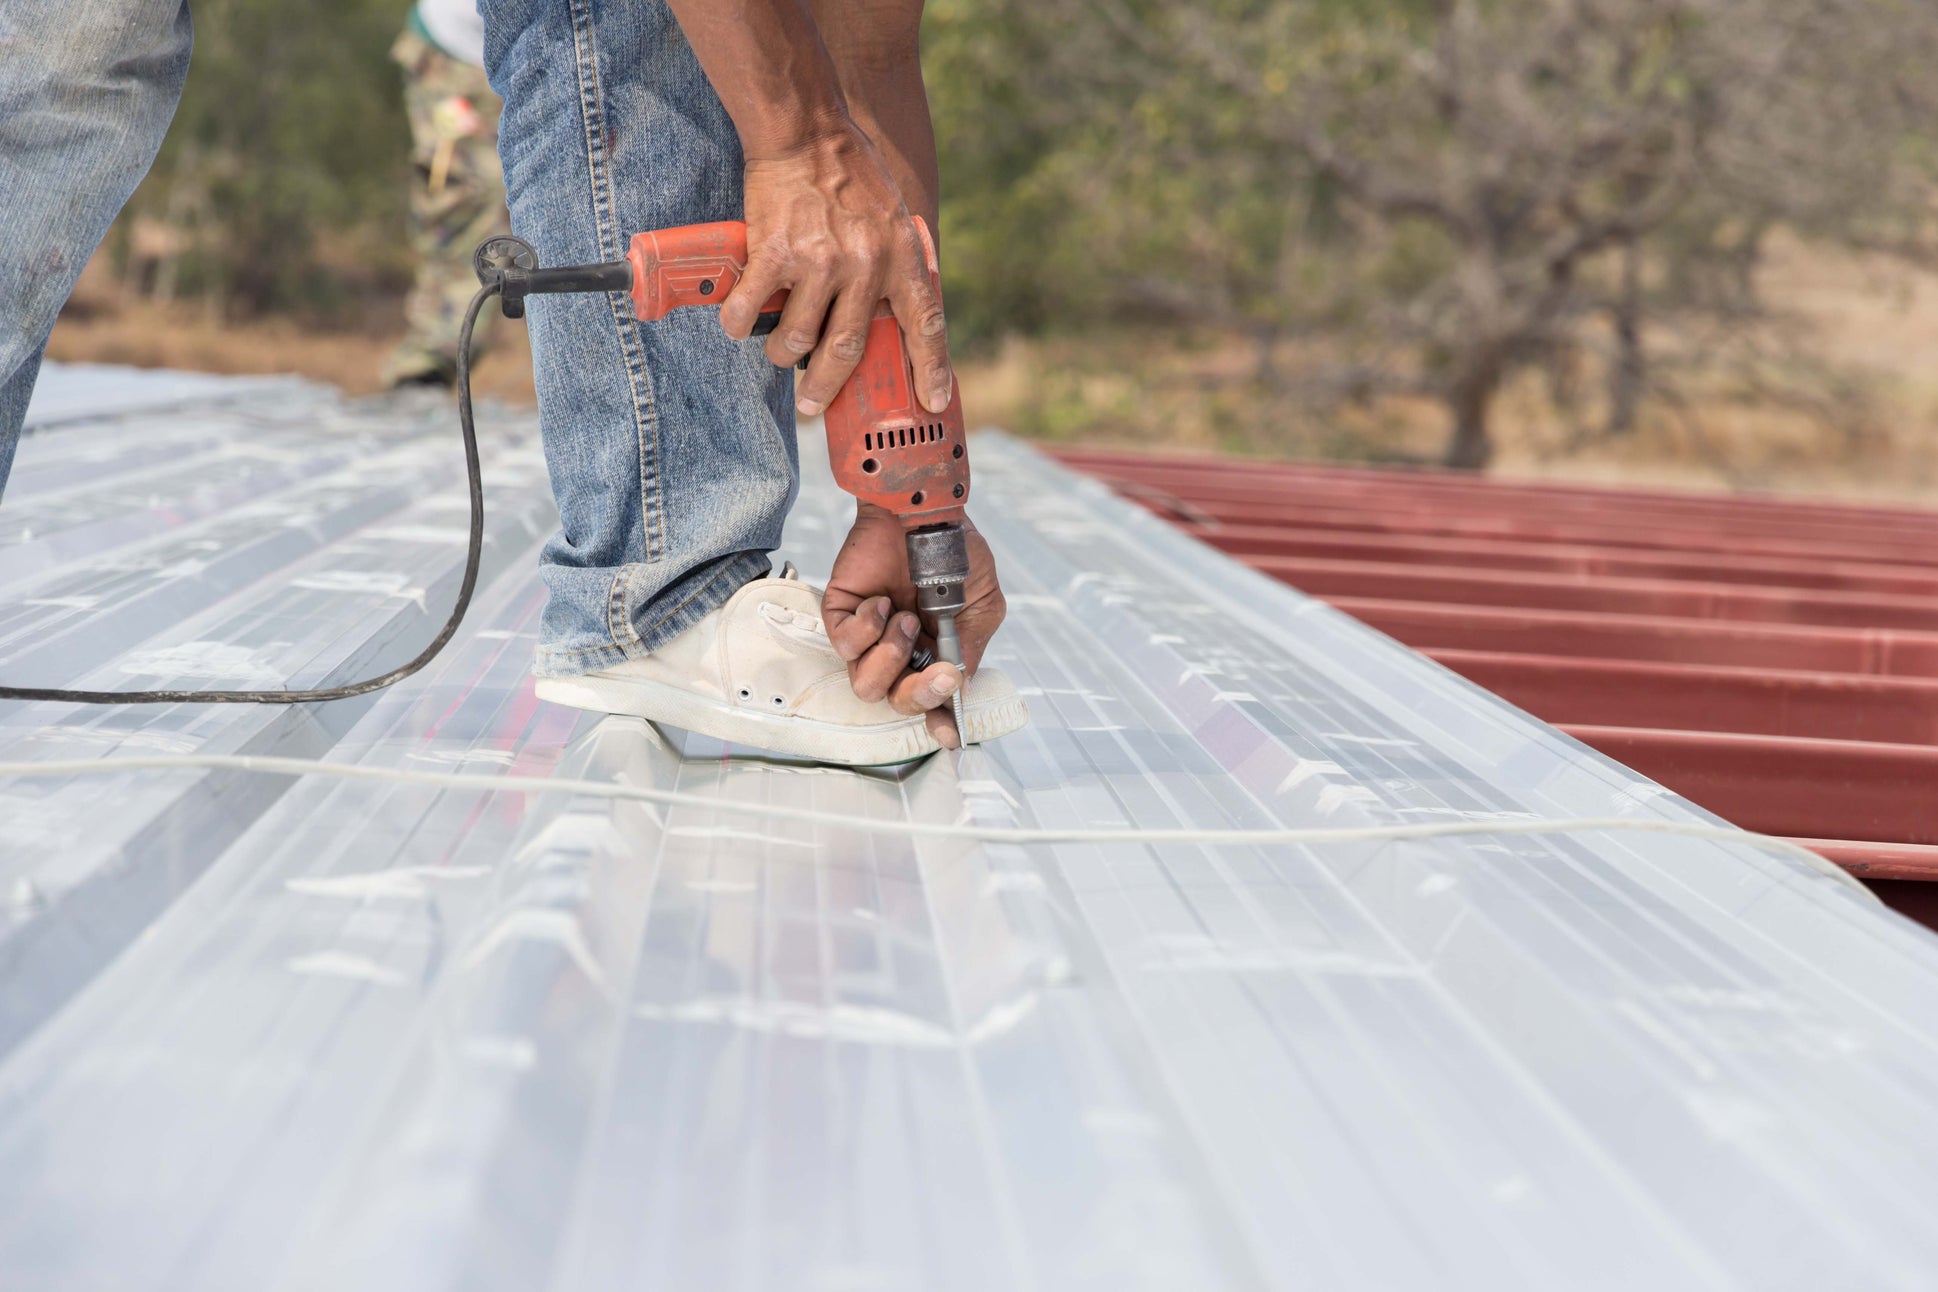 A man stands on a metal roof, drilling a hole